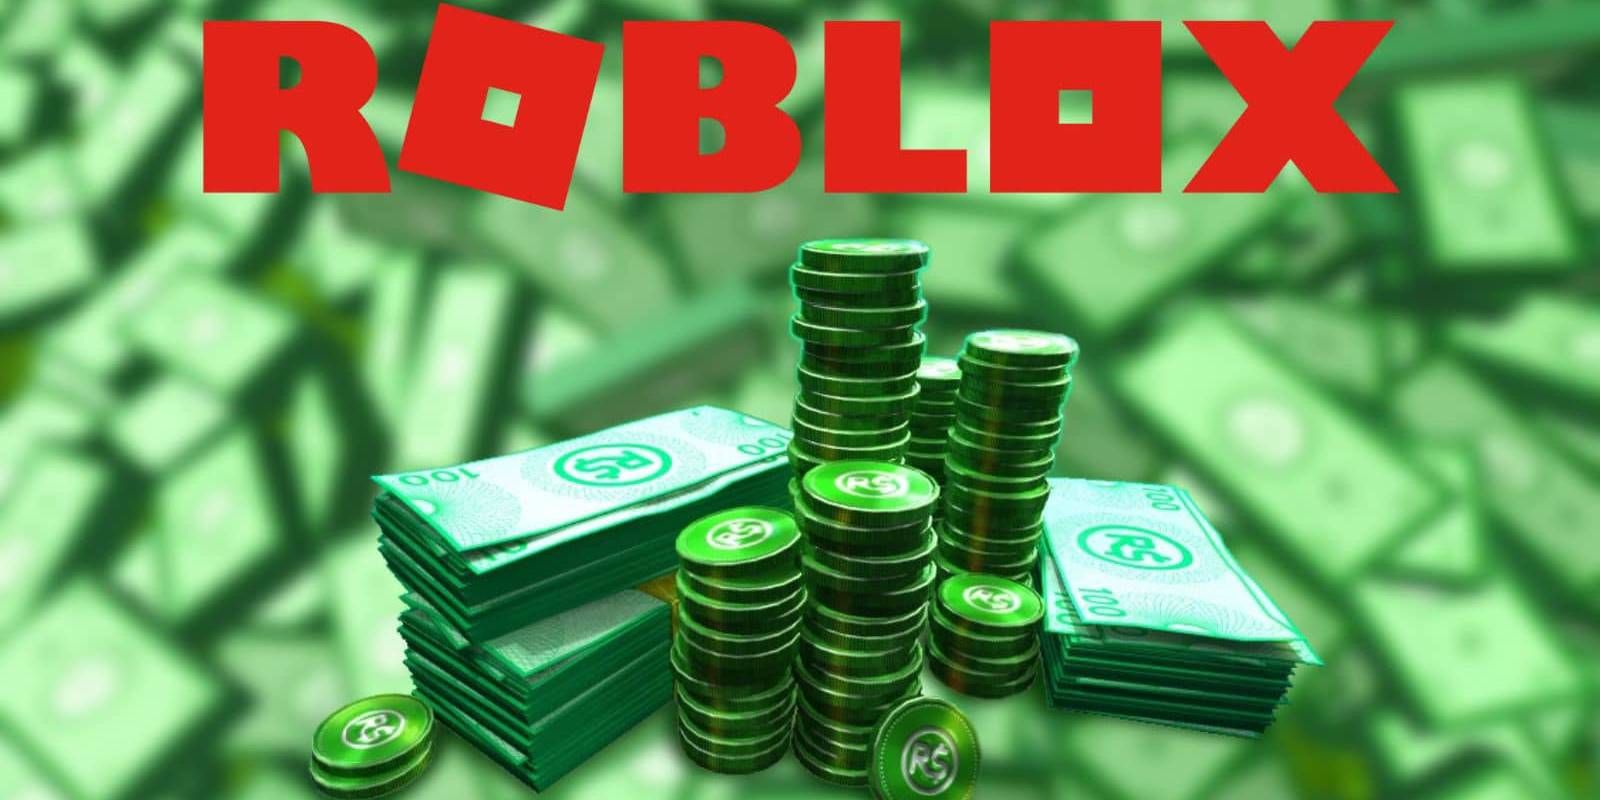 Roblox Robux Premium In-Game Currency that can be Earned For Free From Official Site Promotions